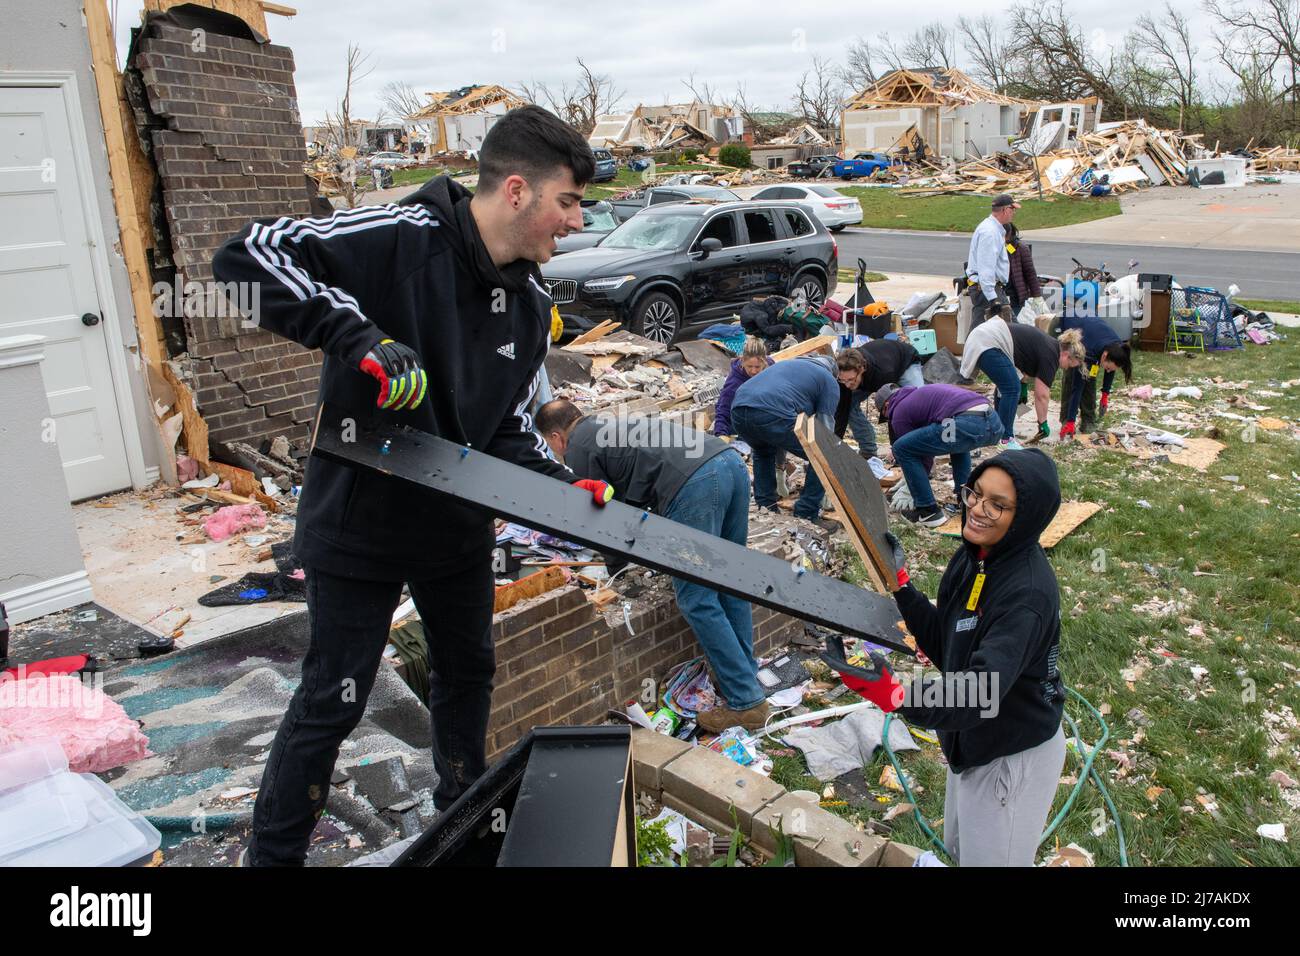 Andover, United States of America. 29 April, 2022. U.S. Air Force airmen work alongside residents to clean up damaged homes in the aftermath of an EF-3 tornado, April 29, 2022, in Andover, Kansas. The tornado damaged hundreds of buildings in the Wichita suburb.  Credit: SSgt. Adam Goodly/U.S. Air Force Photo/Alamy Live News Stock Photo